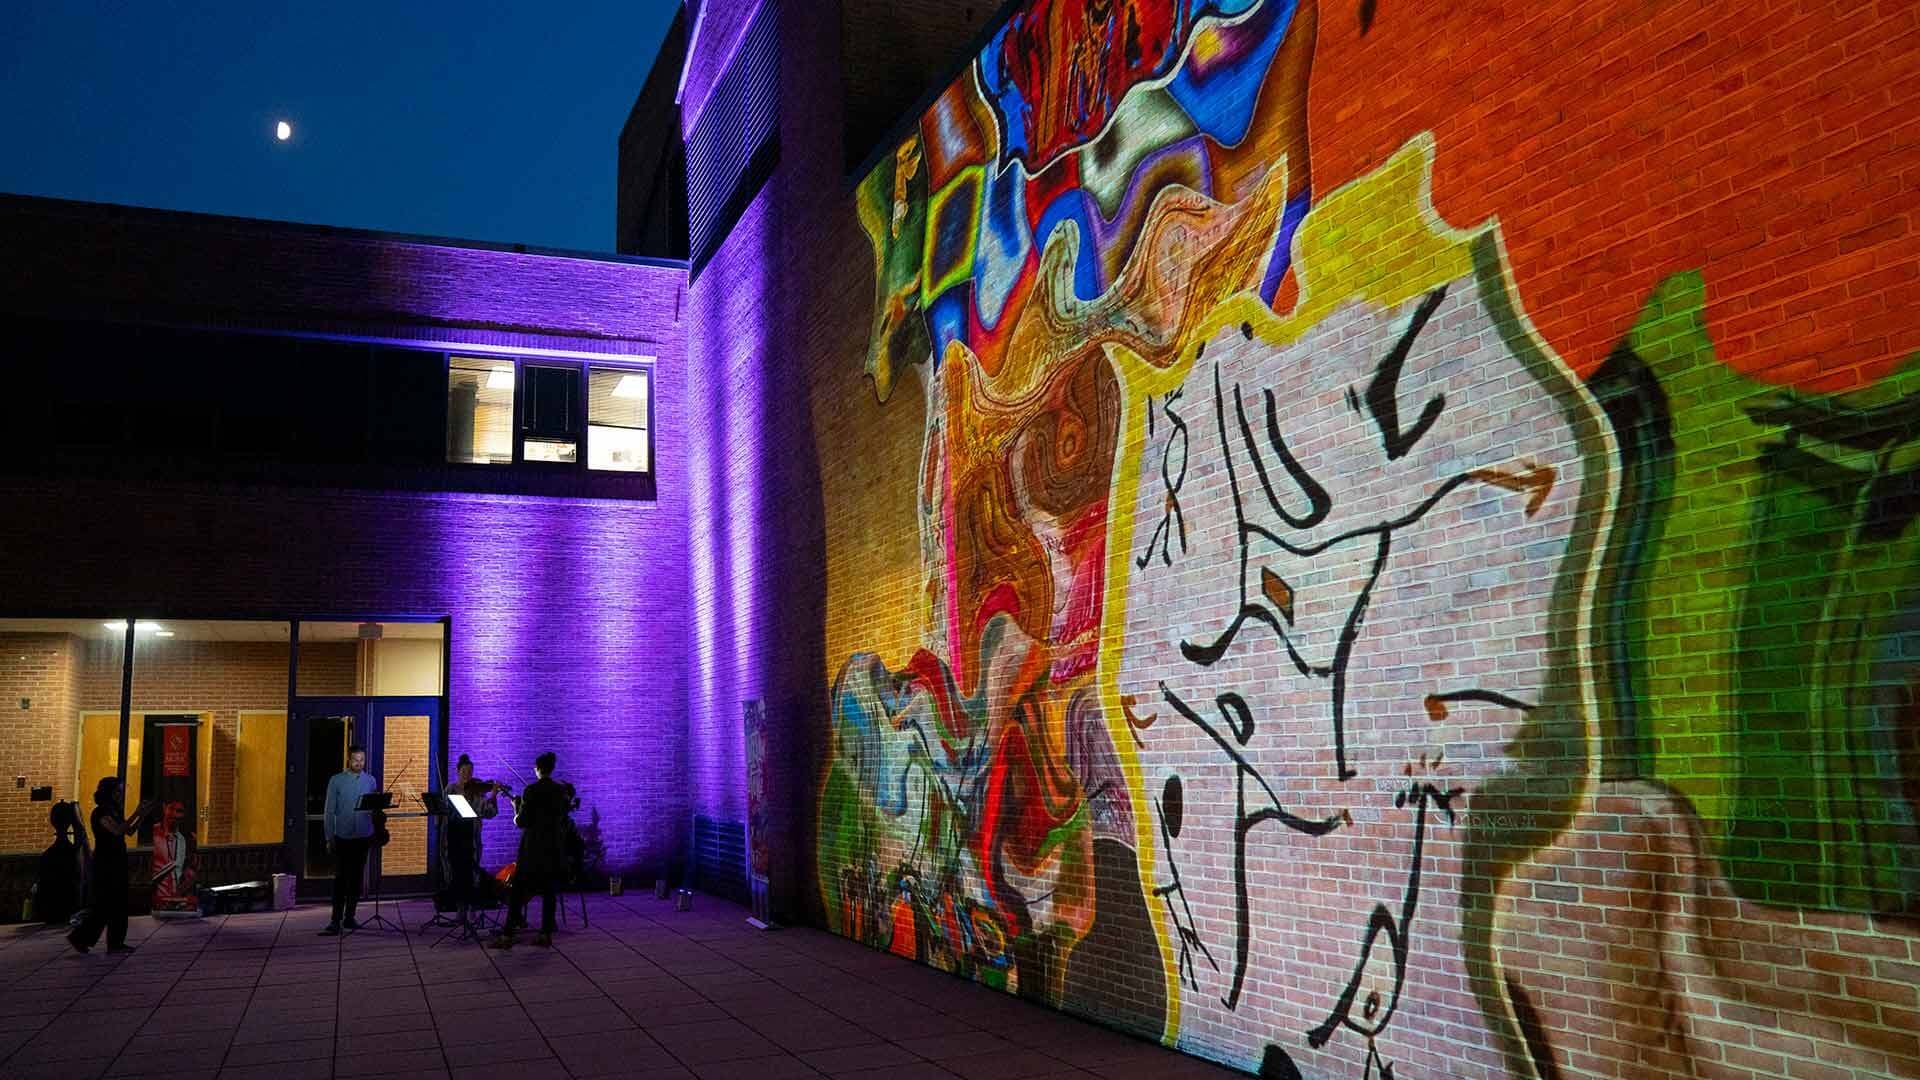 String quartet plays outside as artwork is projected onto building's walls